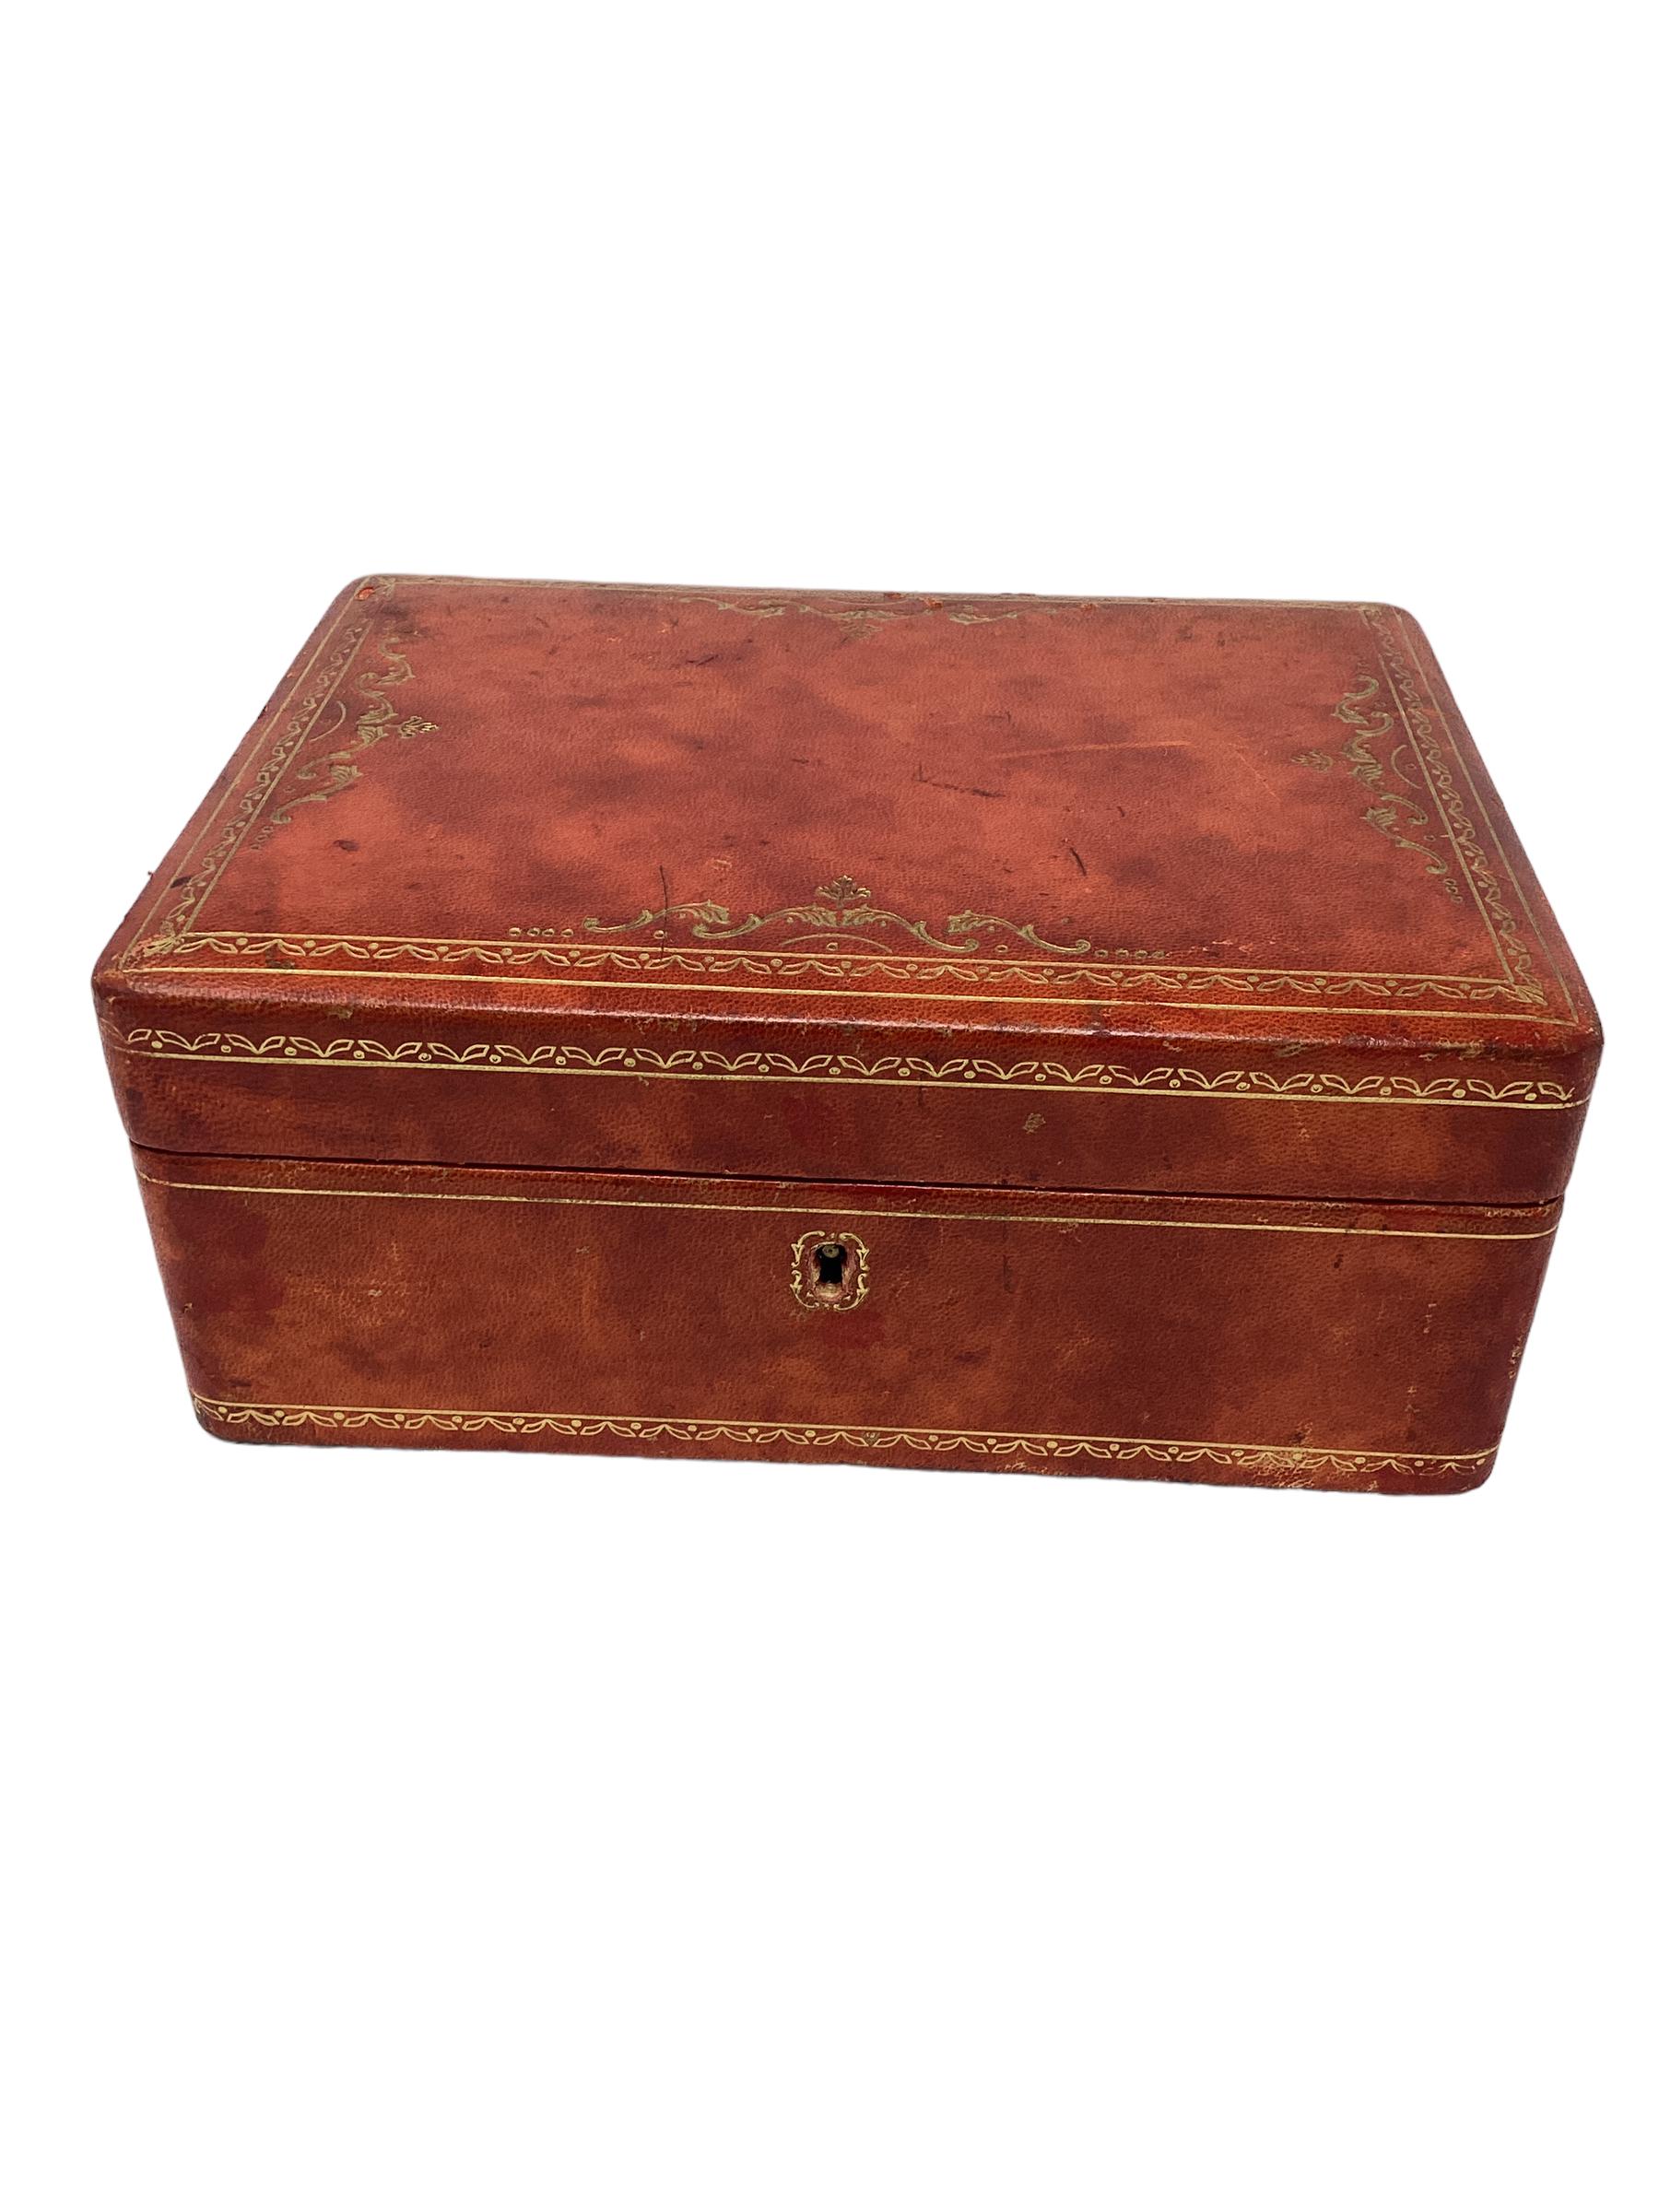 Italian Red Leather Jewelry Box with Gold Tooling  2